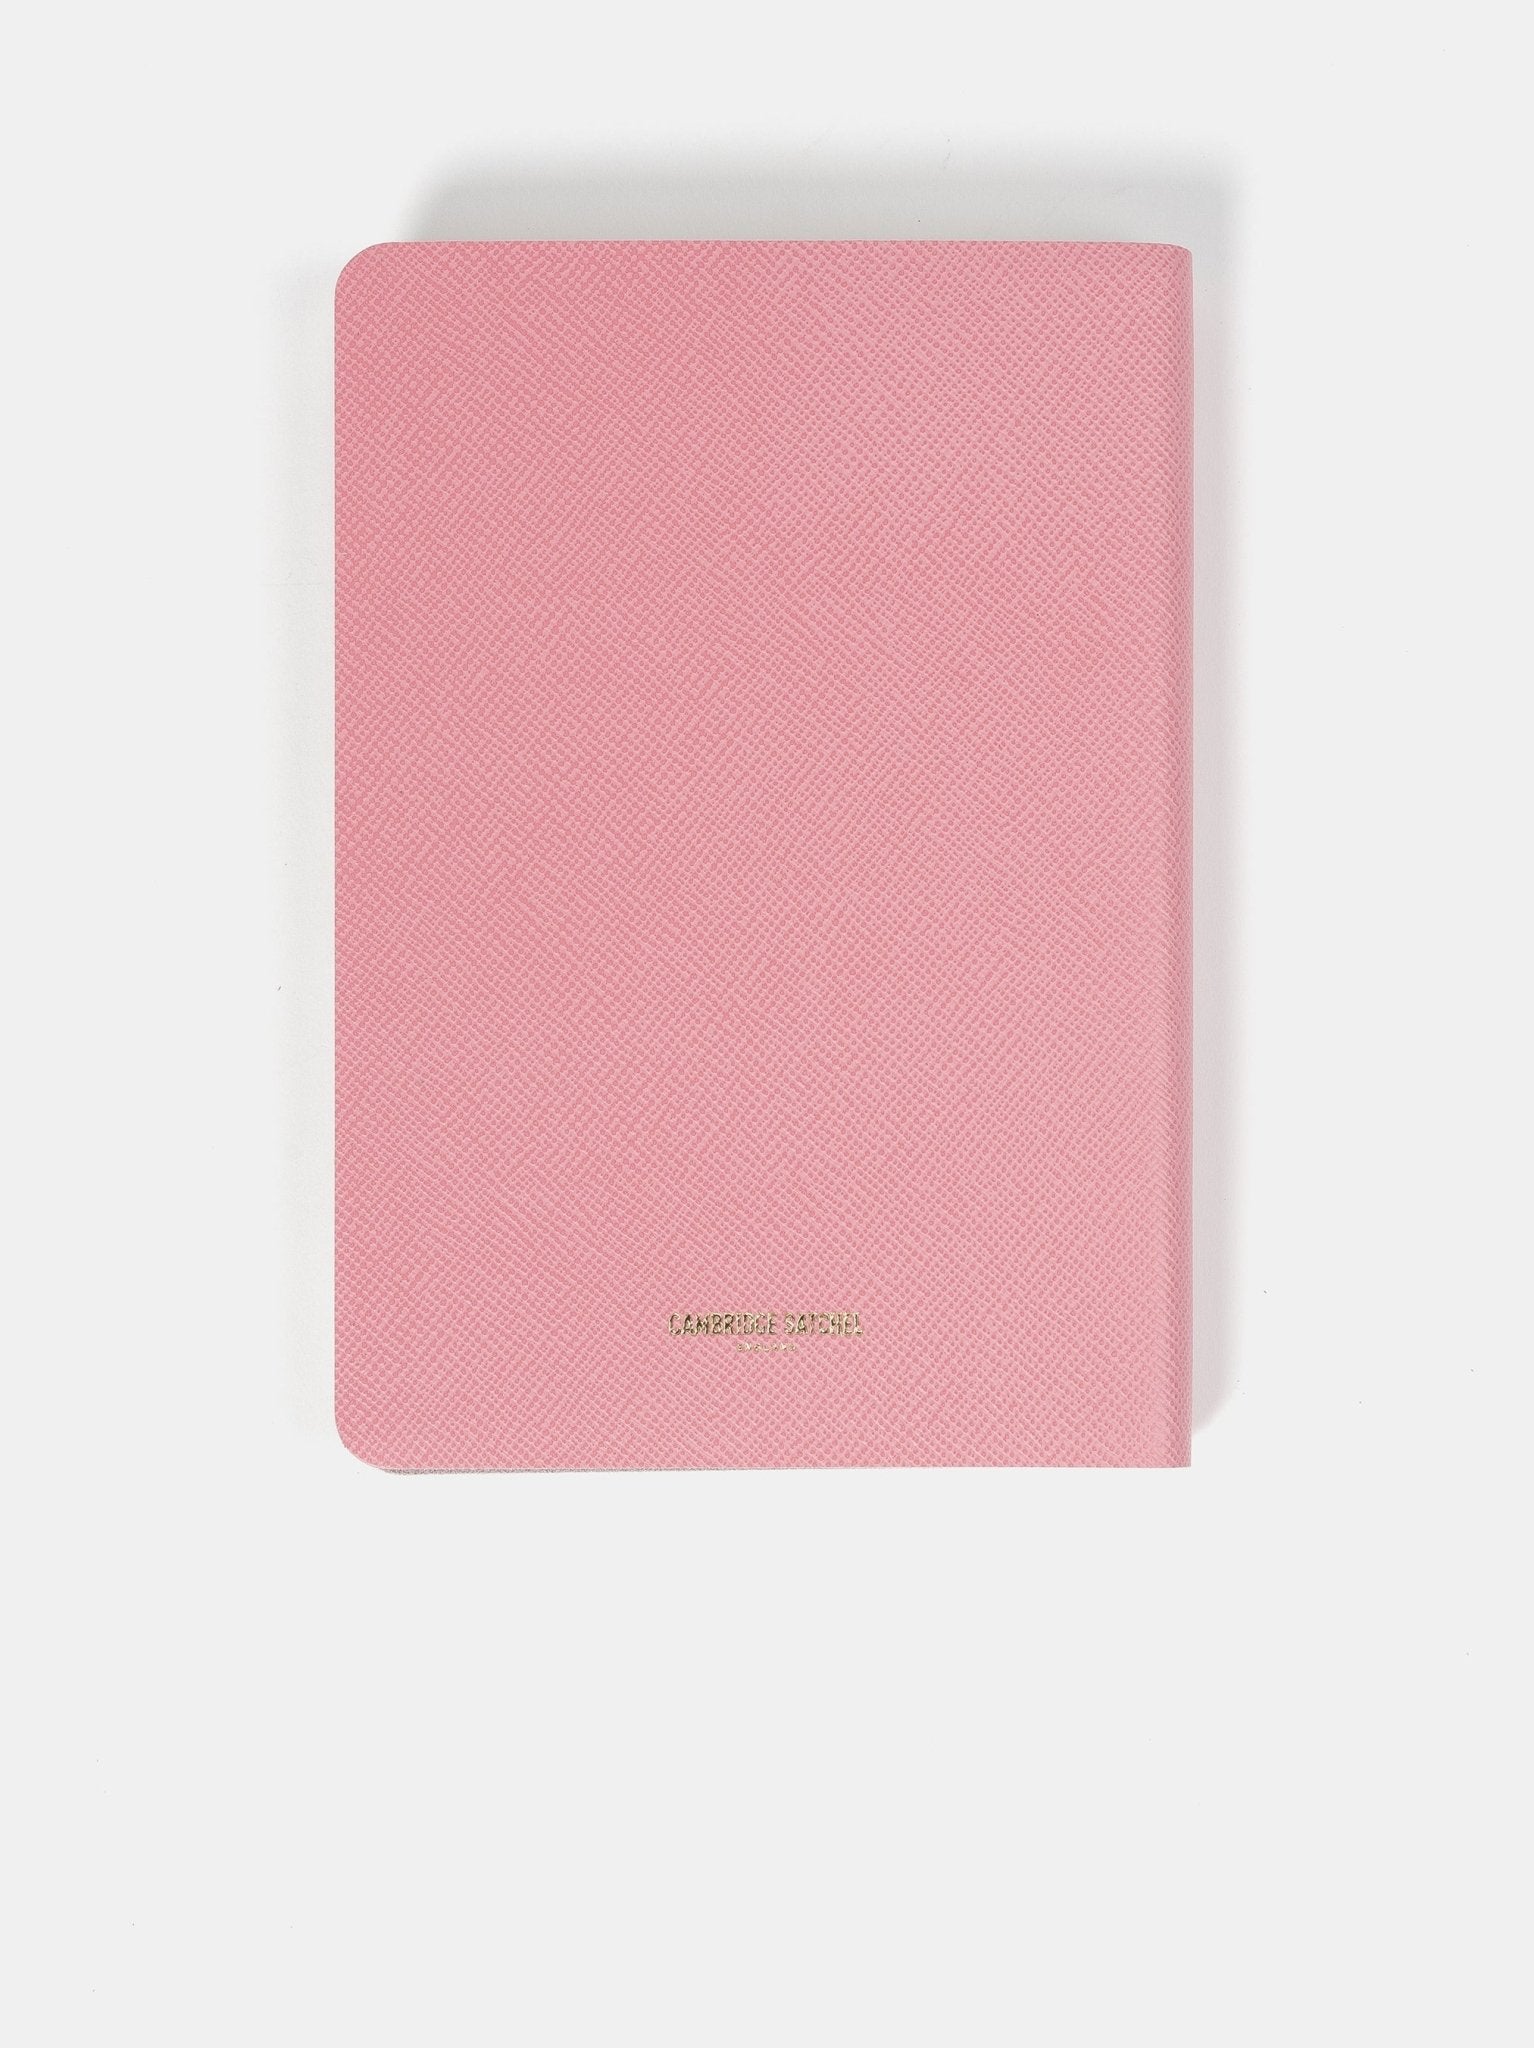 The A5 Notebook - Salmon Pink Saffiano